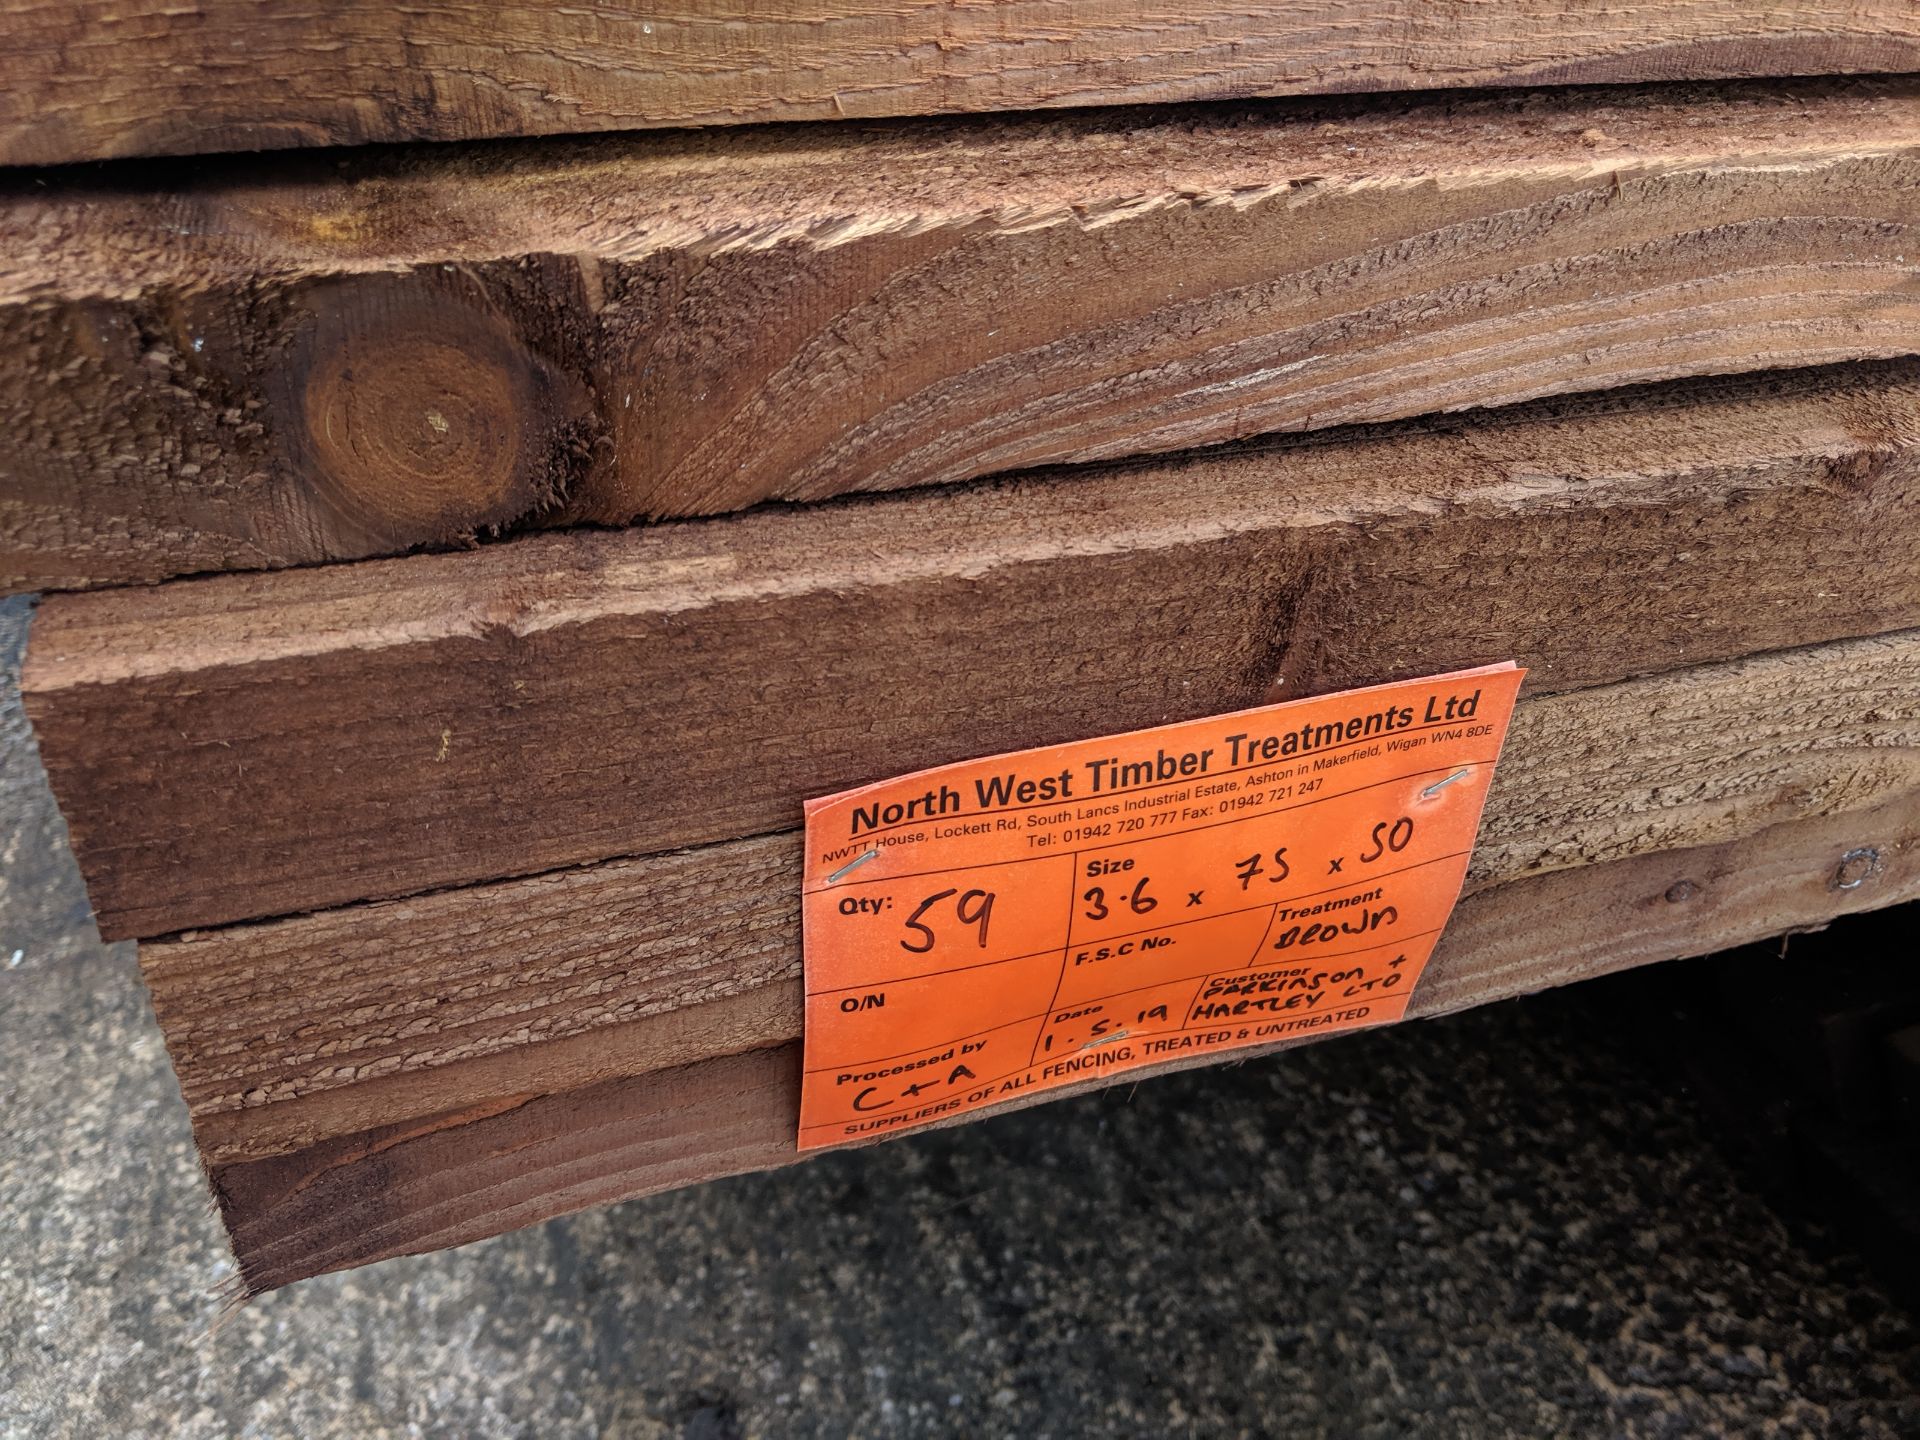 Bundle of approximately 56 brown treated fence posts, indicated on a label as being 3.6 x 75 x 50, - Image 4 of 5